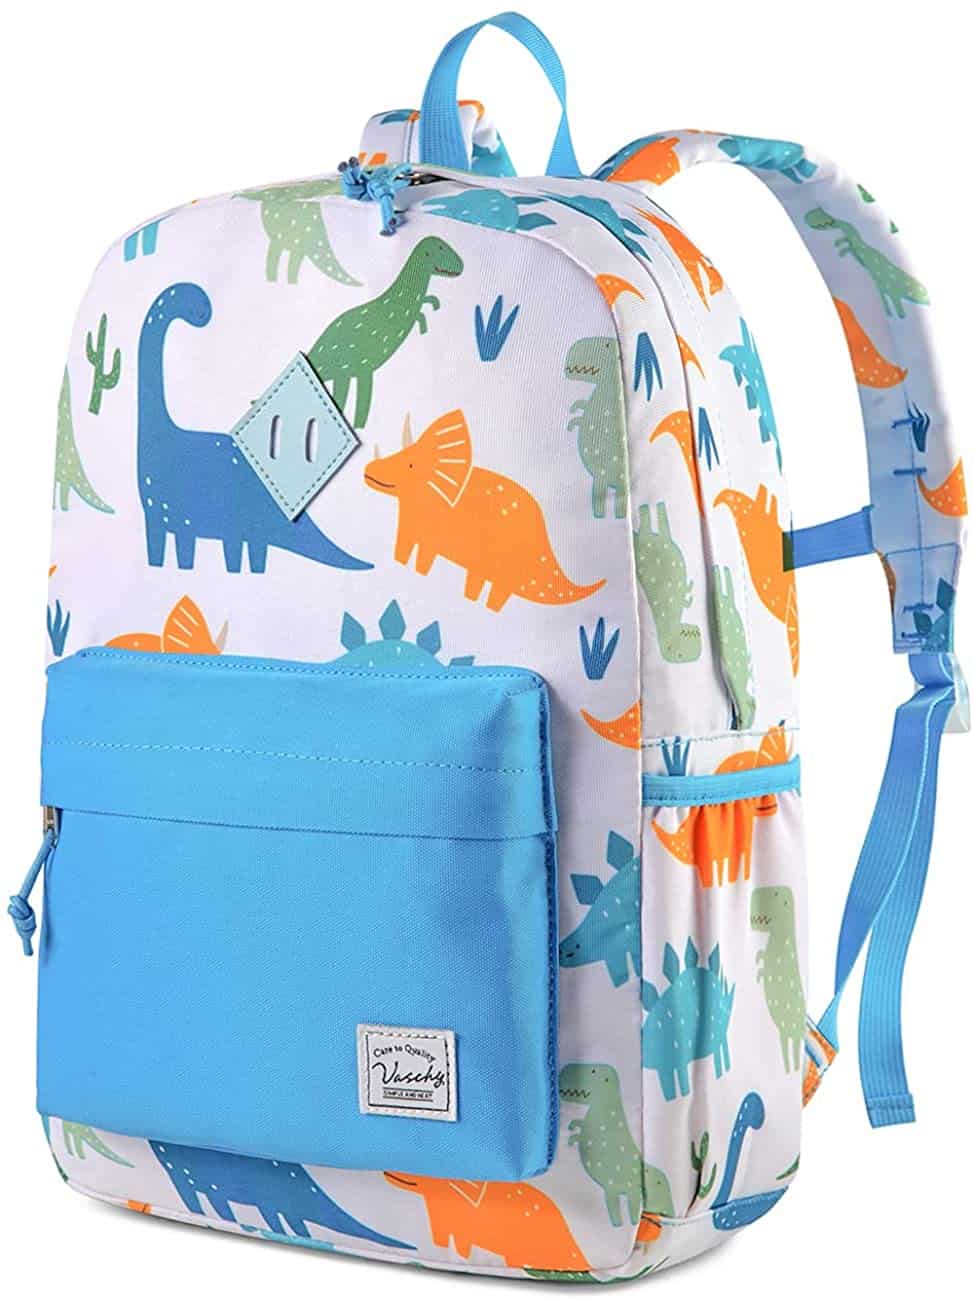 The Best Preschool Backpacks for Toddlers - hellomamablog.com